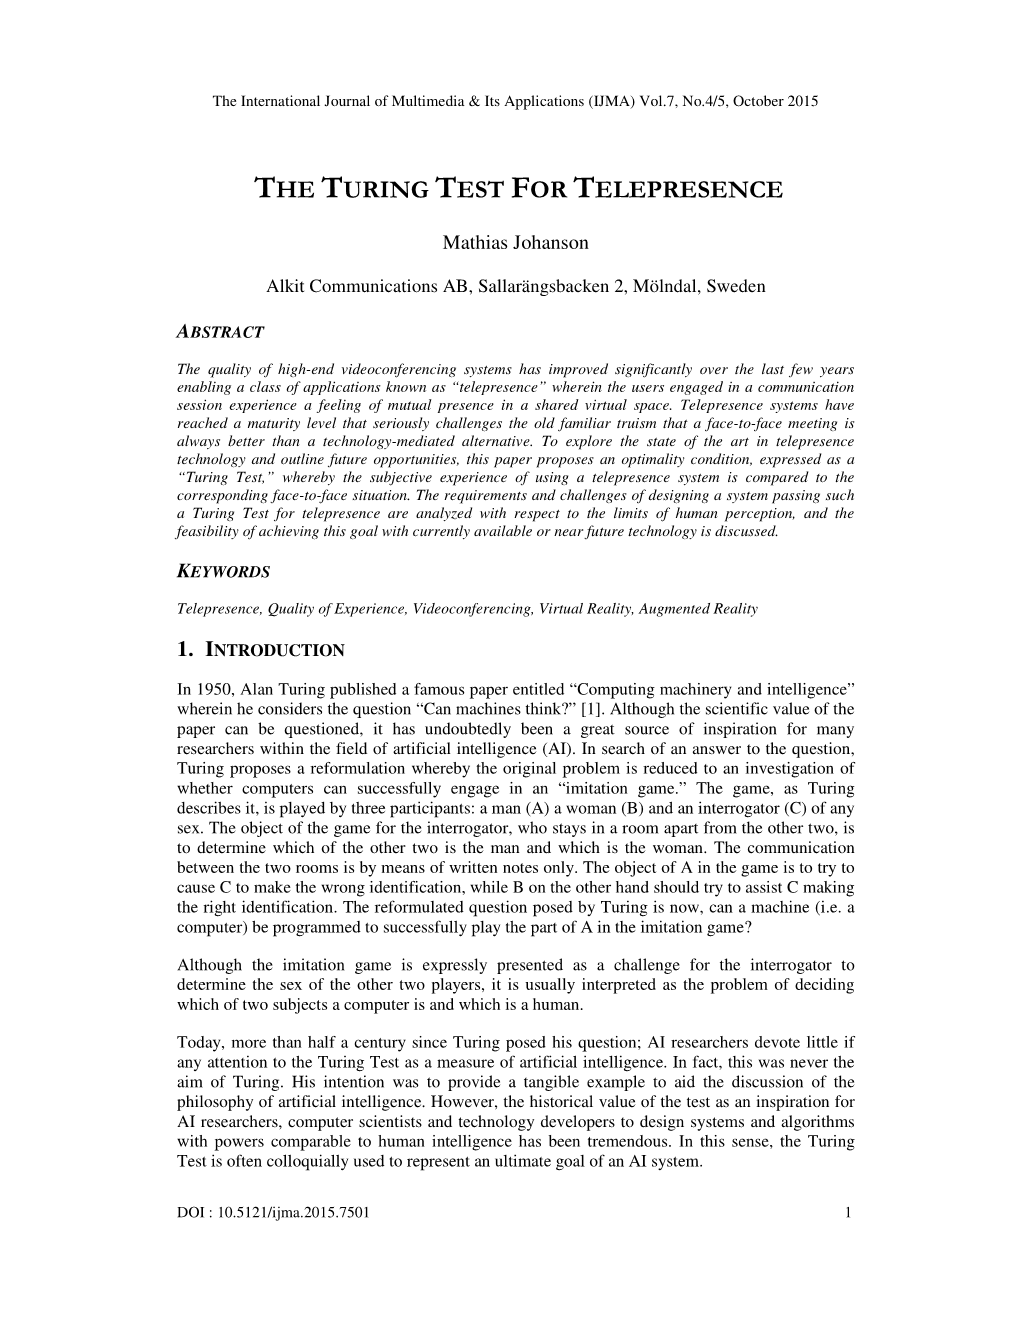 The Turing Test for Telepresence